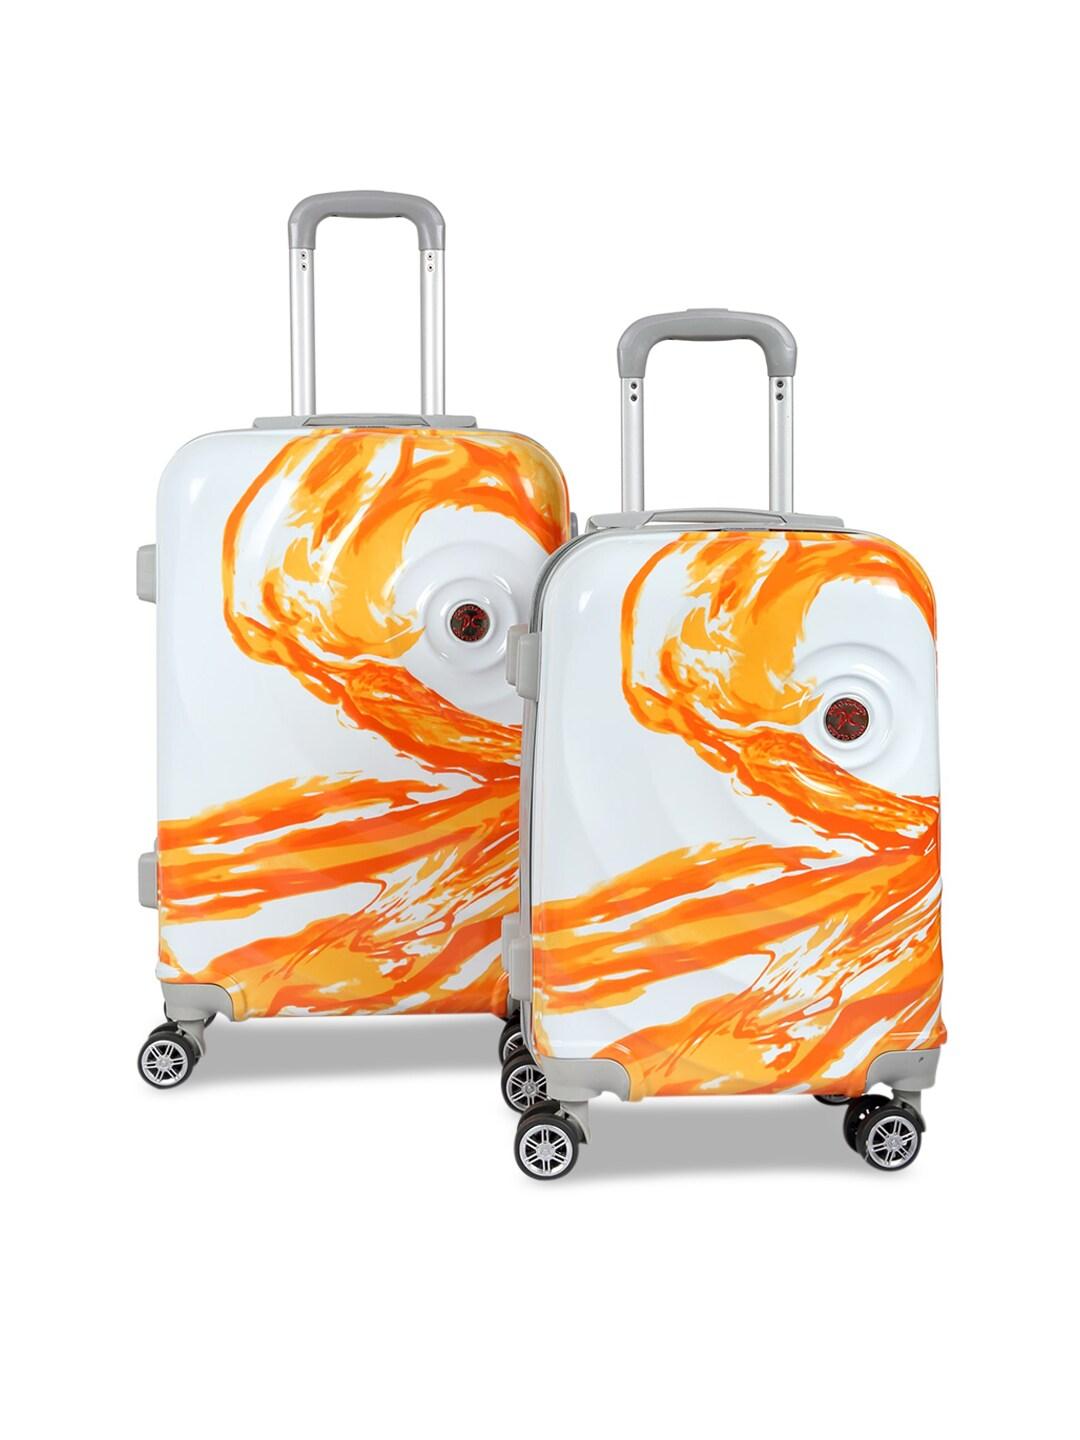 Polo Class Orange & White Set of 2 Printed Hard Case 360 Degree Rotation Trolley Suitcases